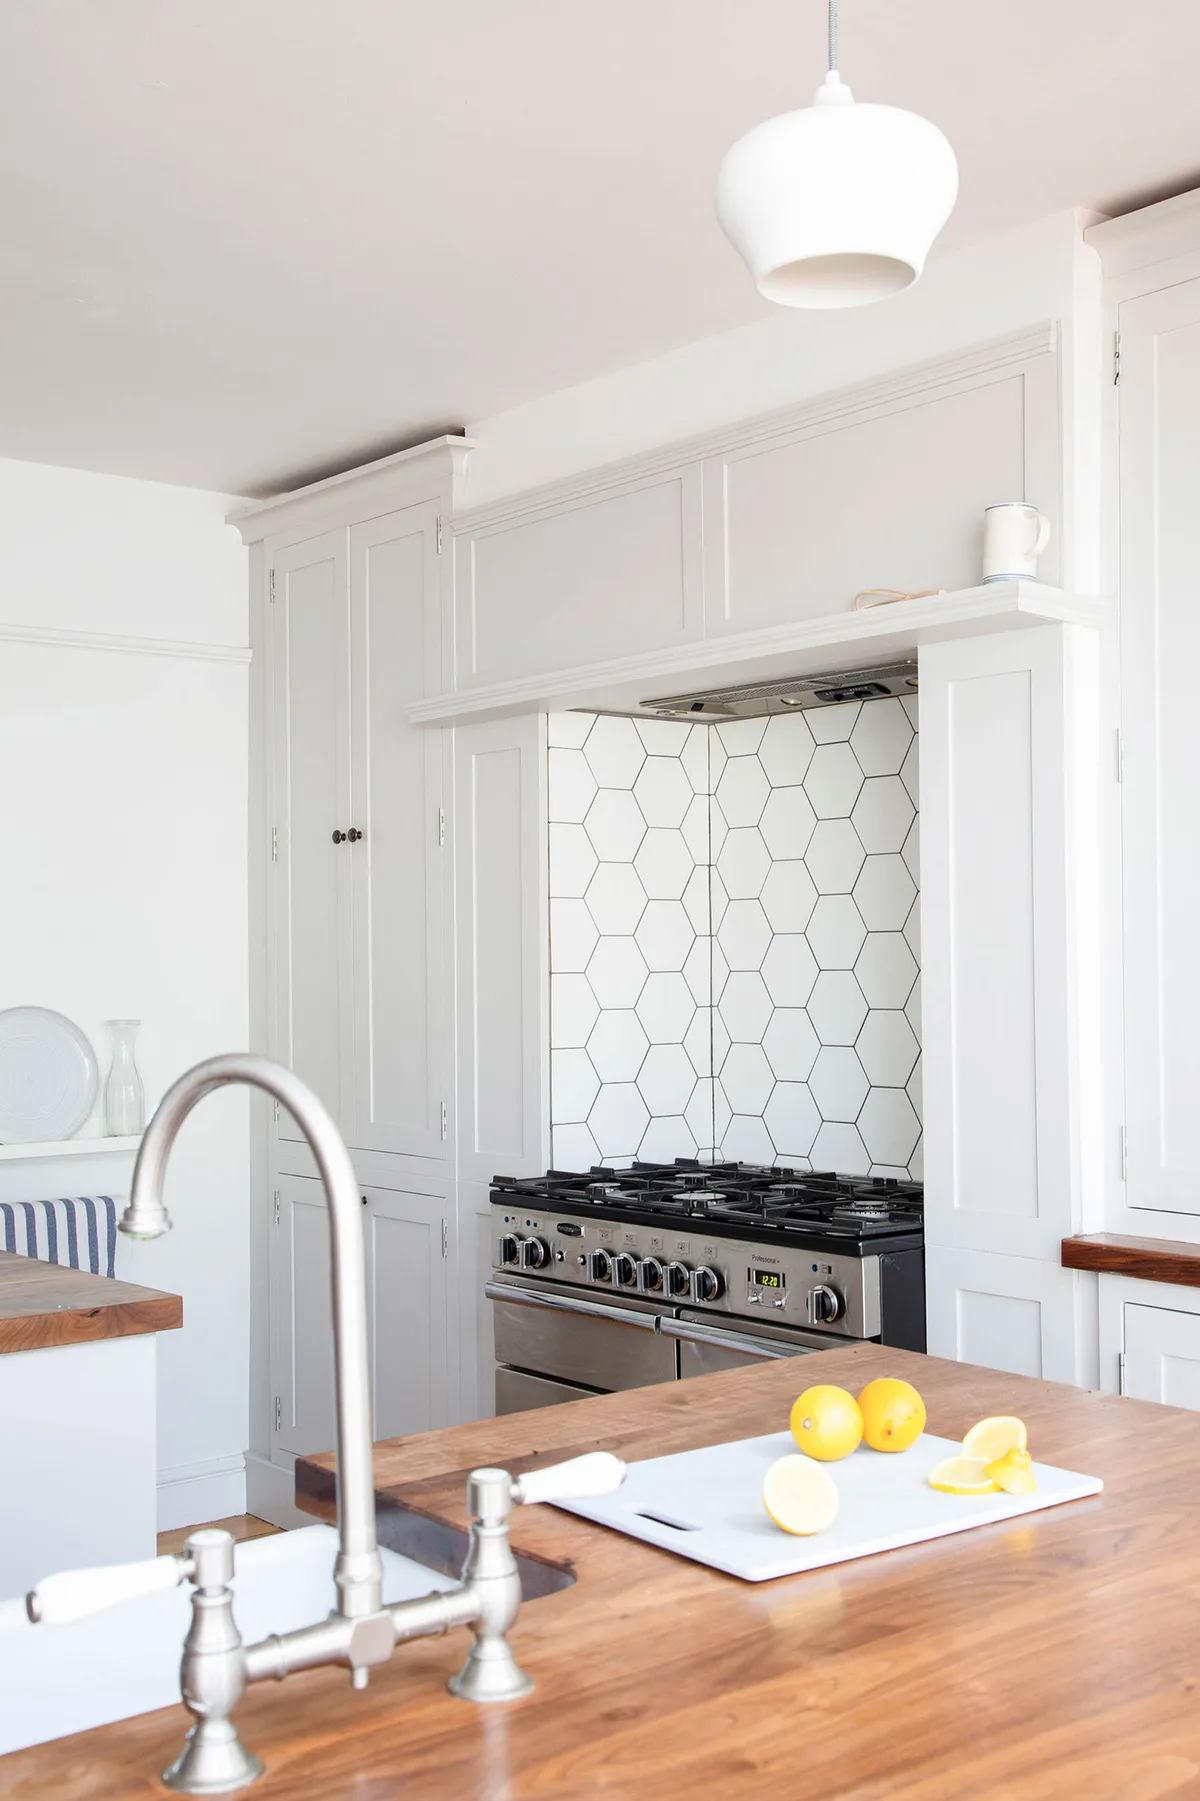 The couple paired simple Shaker-style cabinets with wooden worktops and a modern hexagonal tile splashback